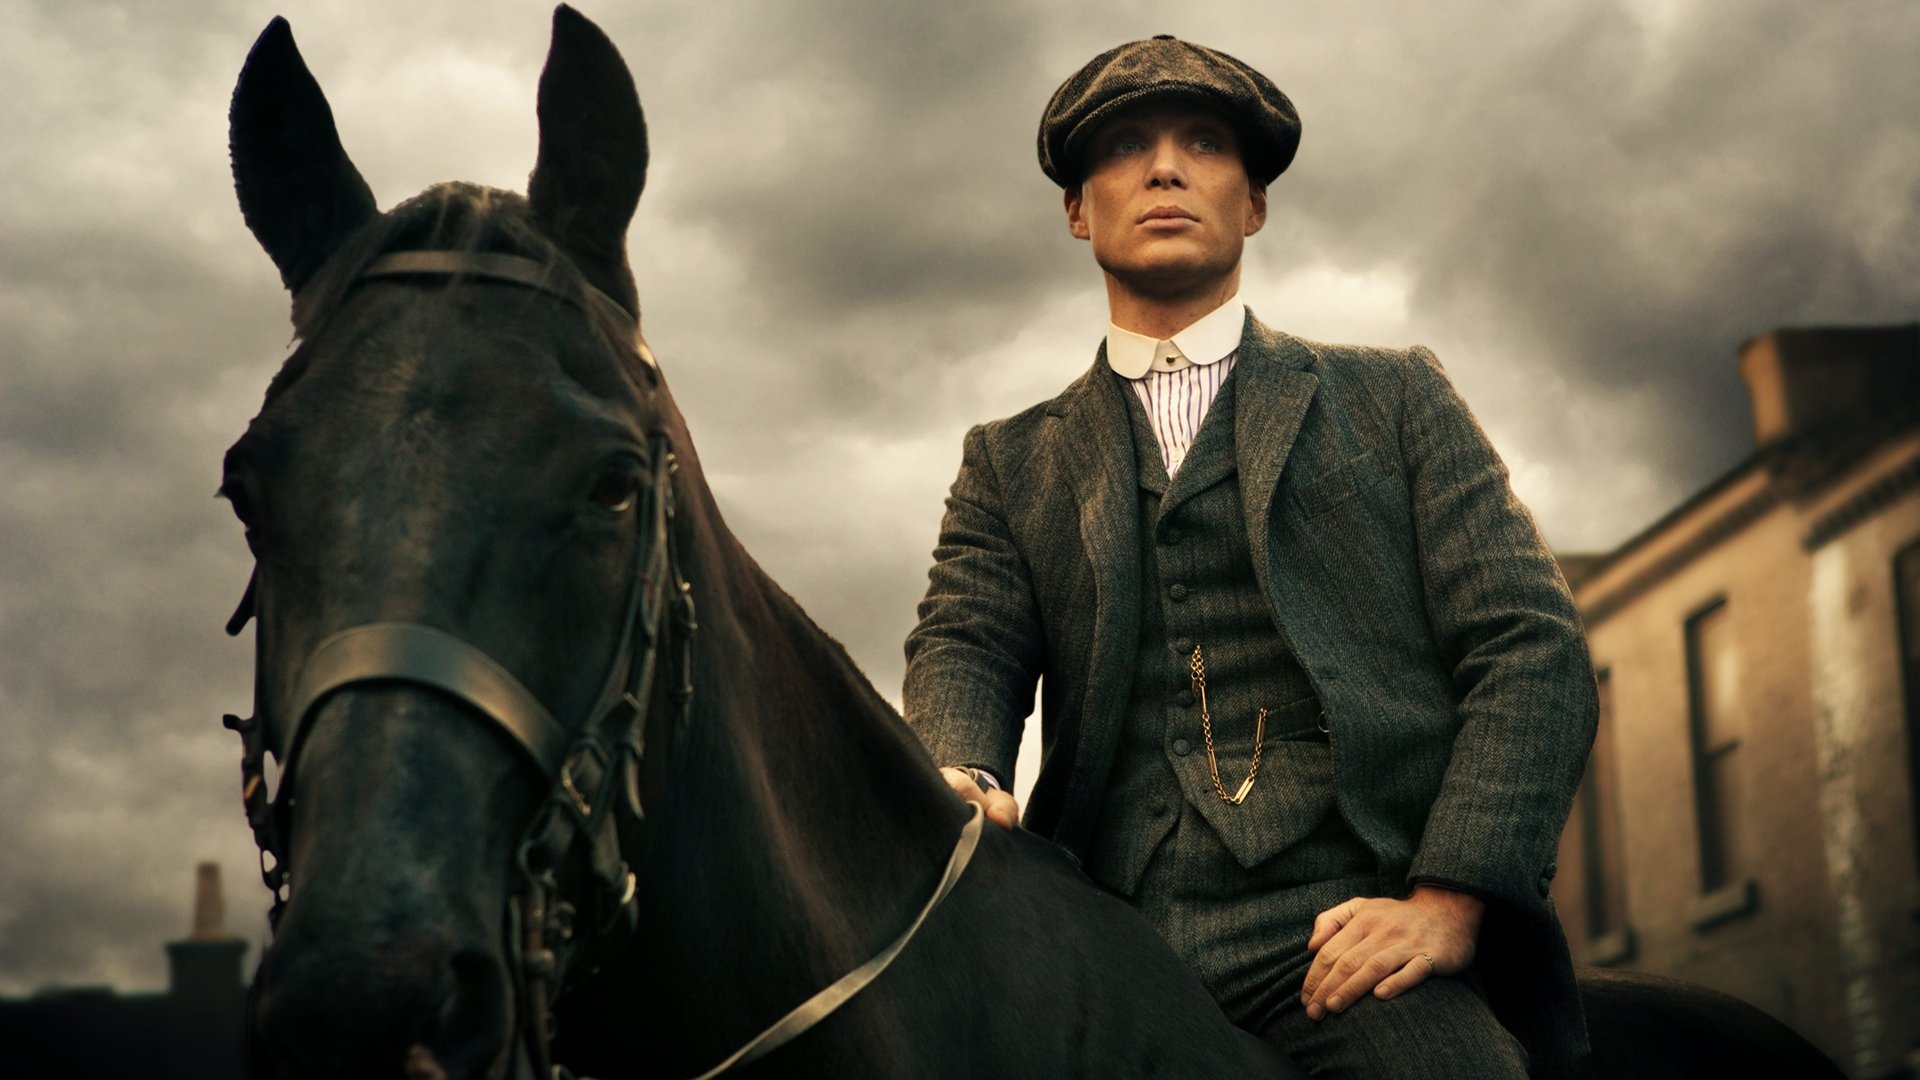 Shelby Family, Peaky Blinders best wallpapers, Supertab themes, 1920x1080 Full HD Desktop